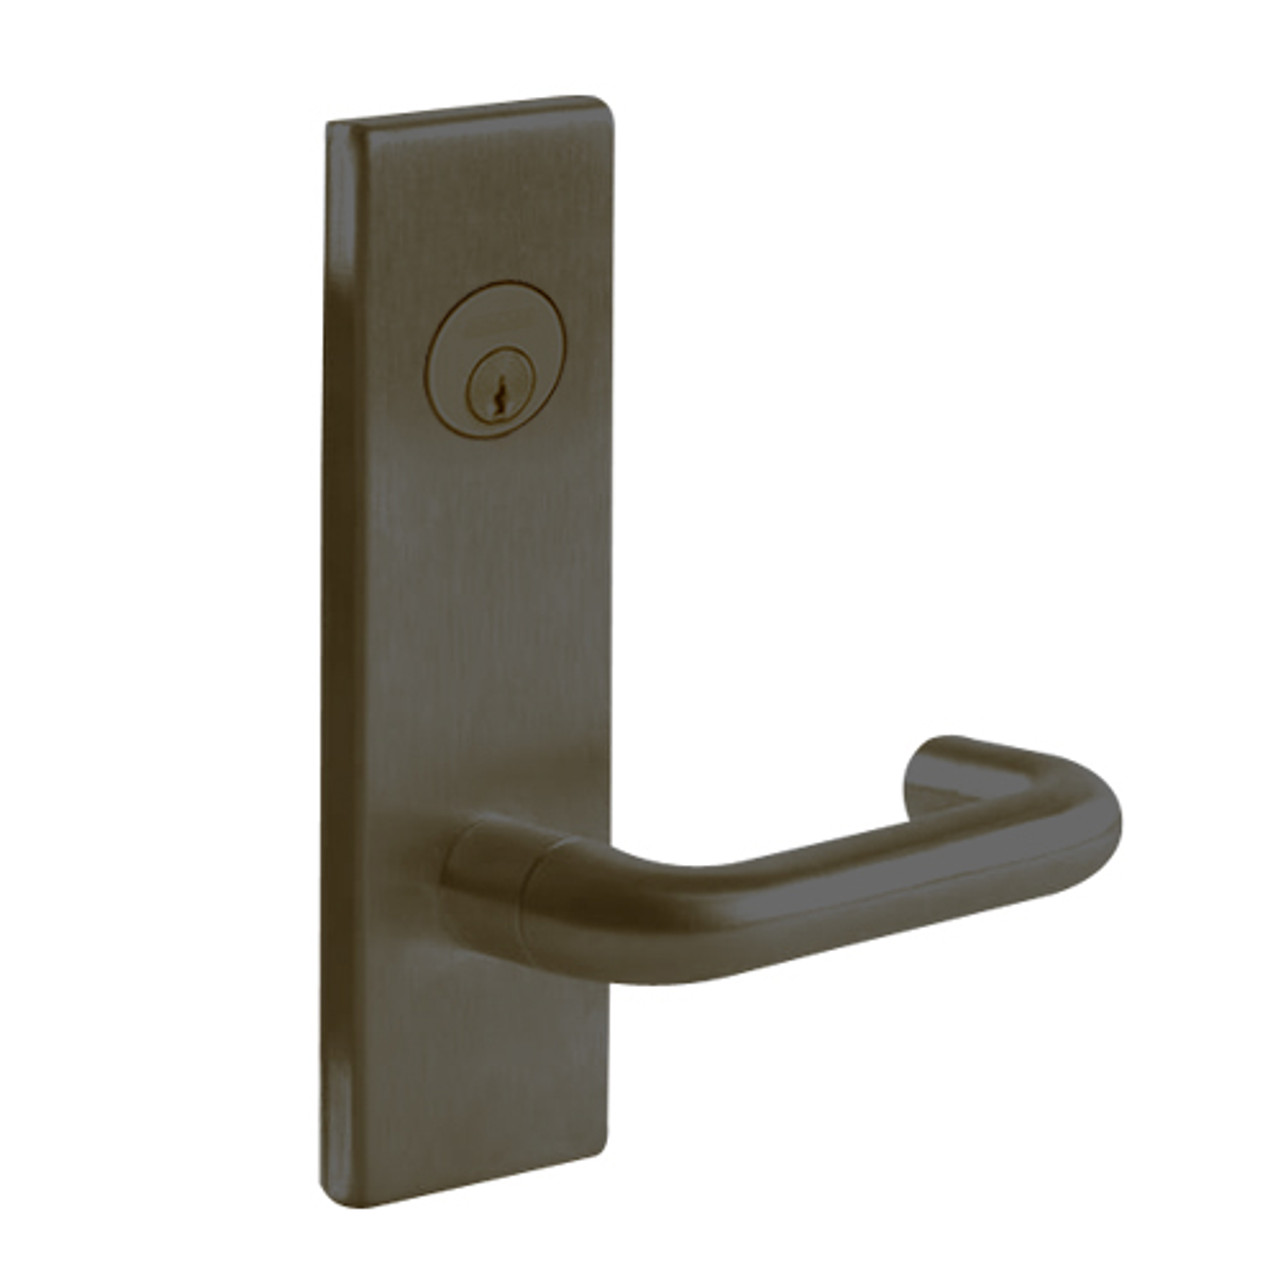 L9026P-03N-613 Schlage L Series Exit Lock with Cylinder Commercial Mortise Lock with 03 Cast Lever Design in Oil Rubbed Bronze